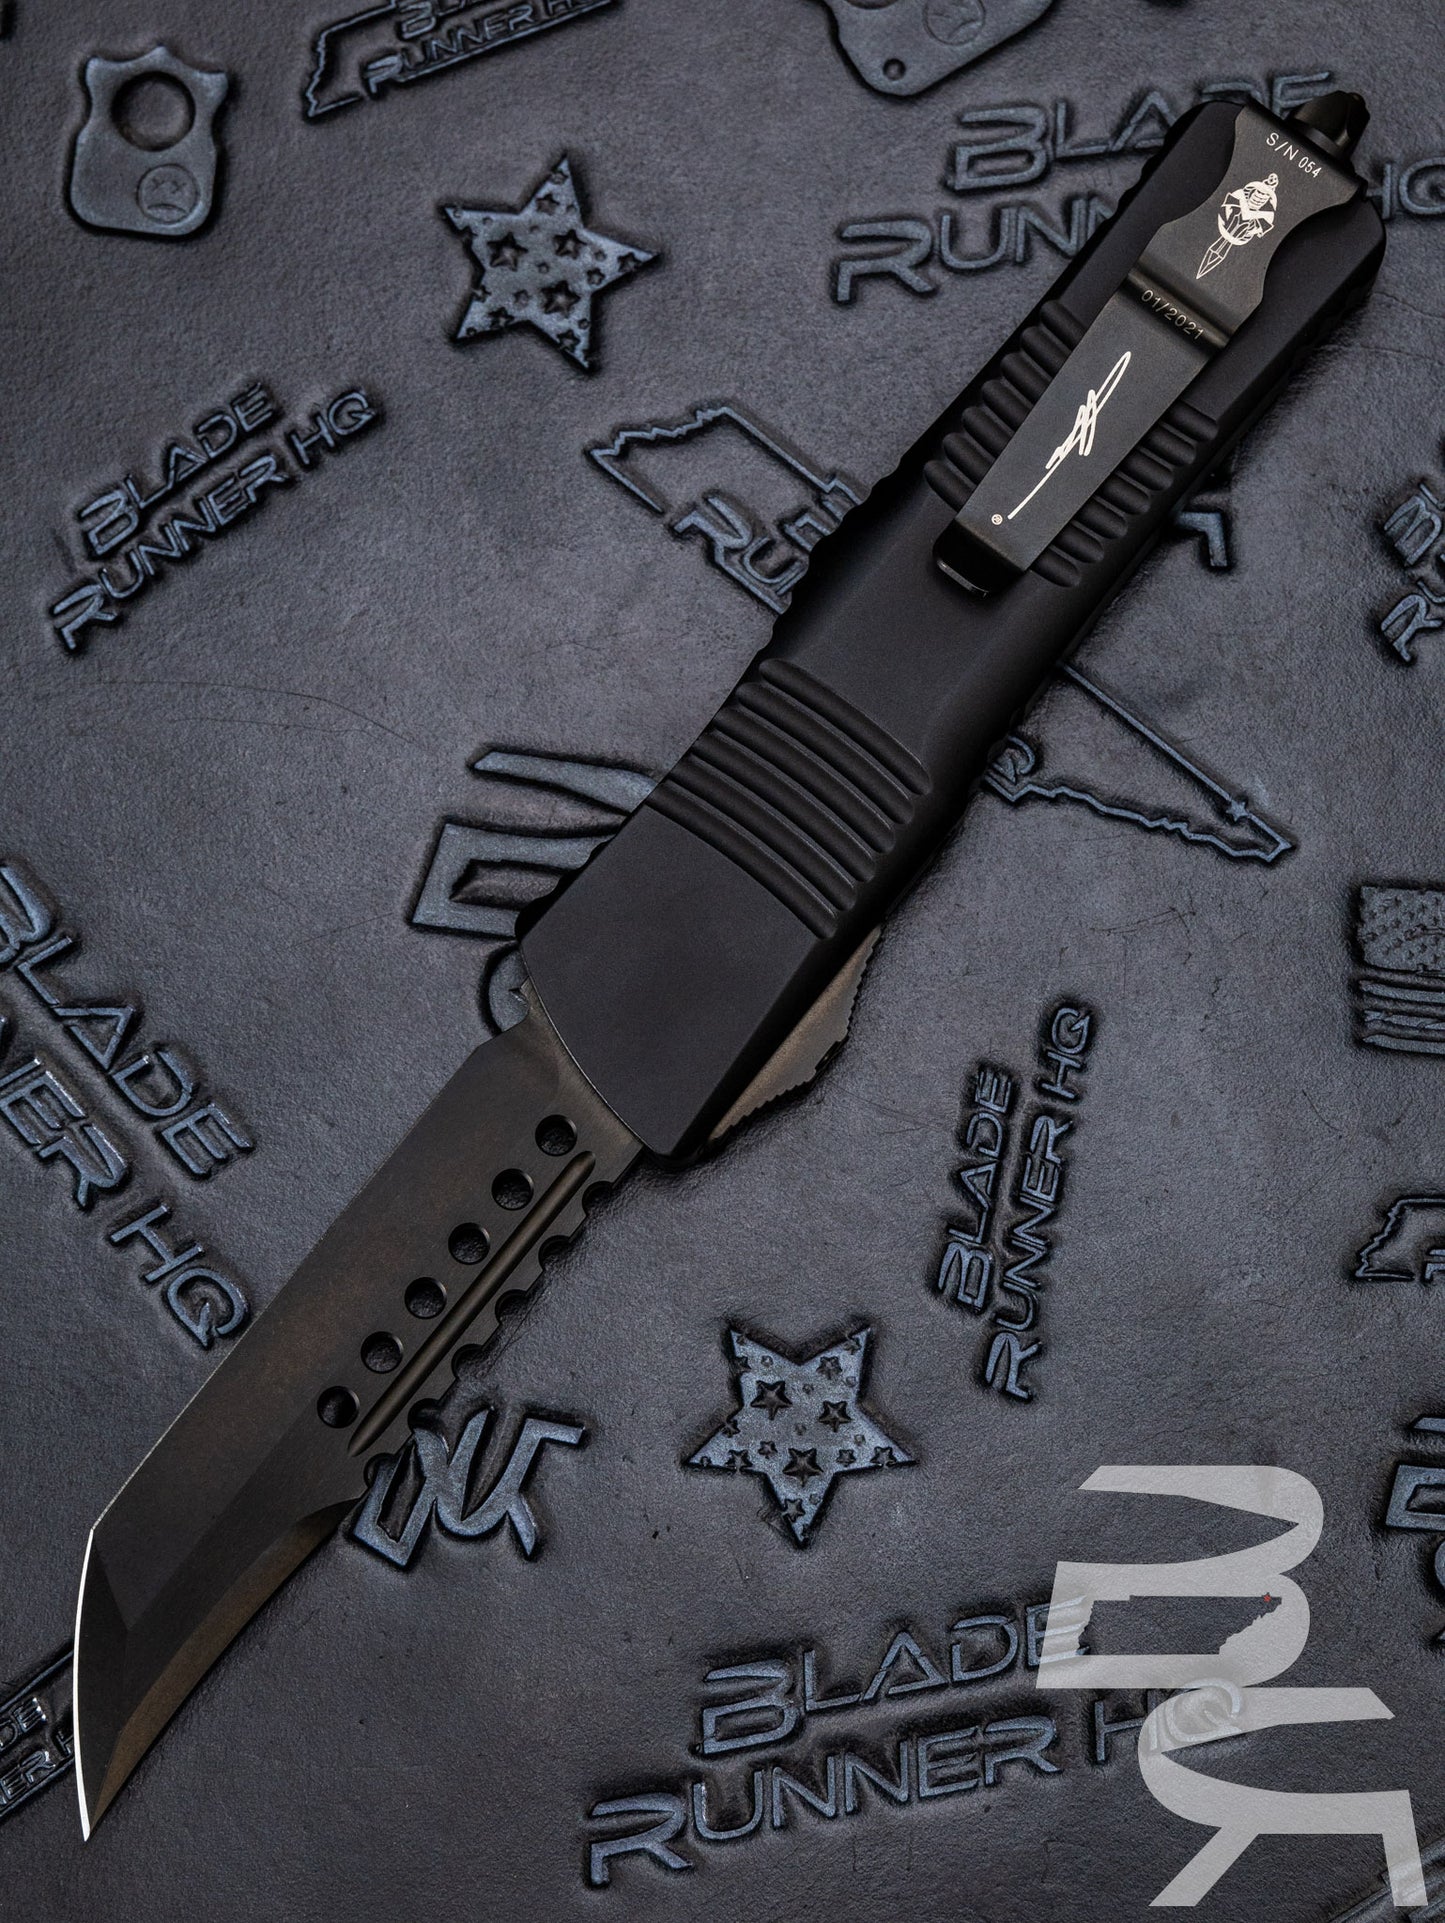 Pre Owned Microtech 219-1DLCTS Combat Troodon Hellhound - Black Handle - DLC Blade - Signature Series